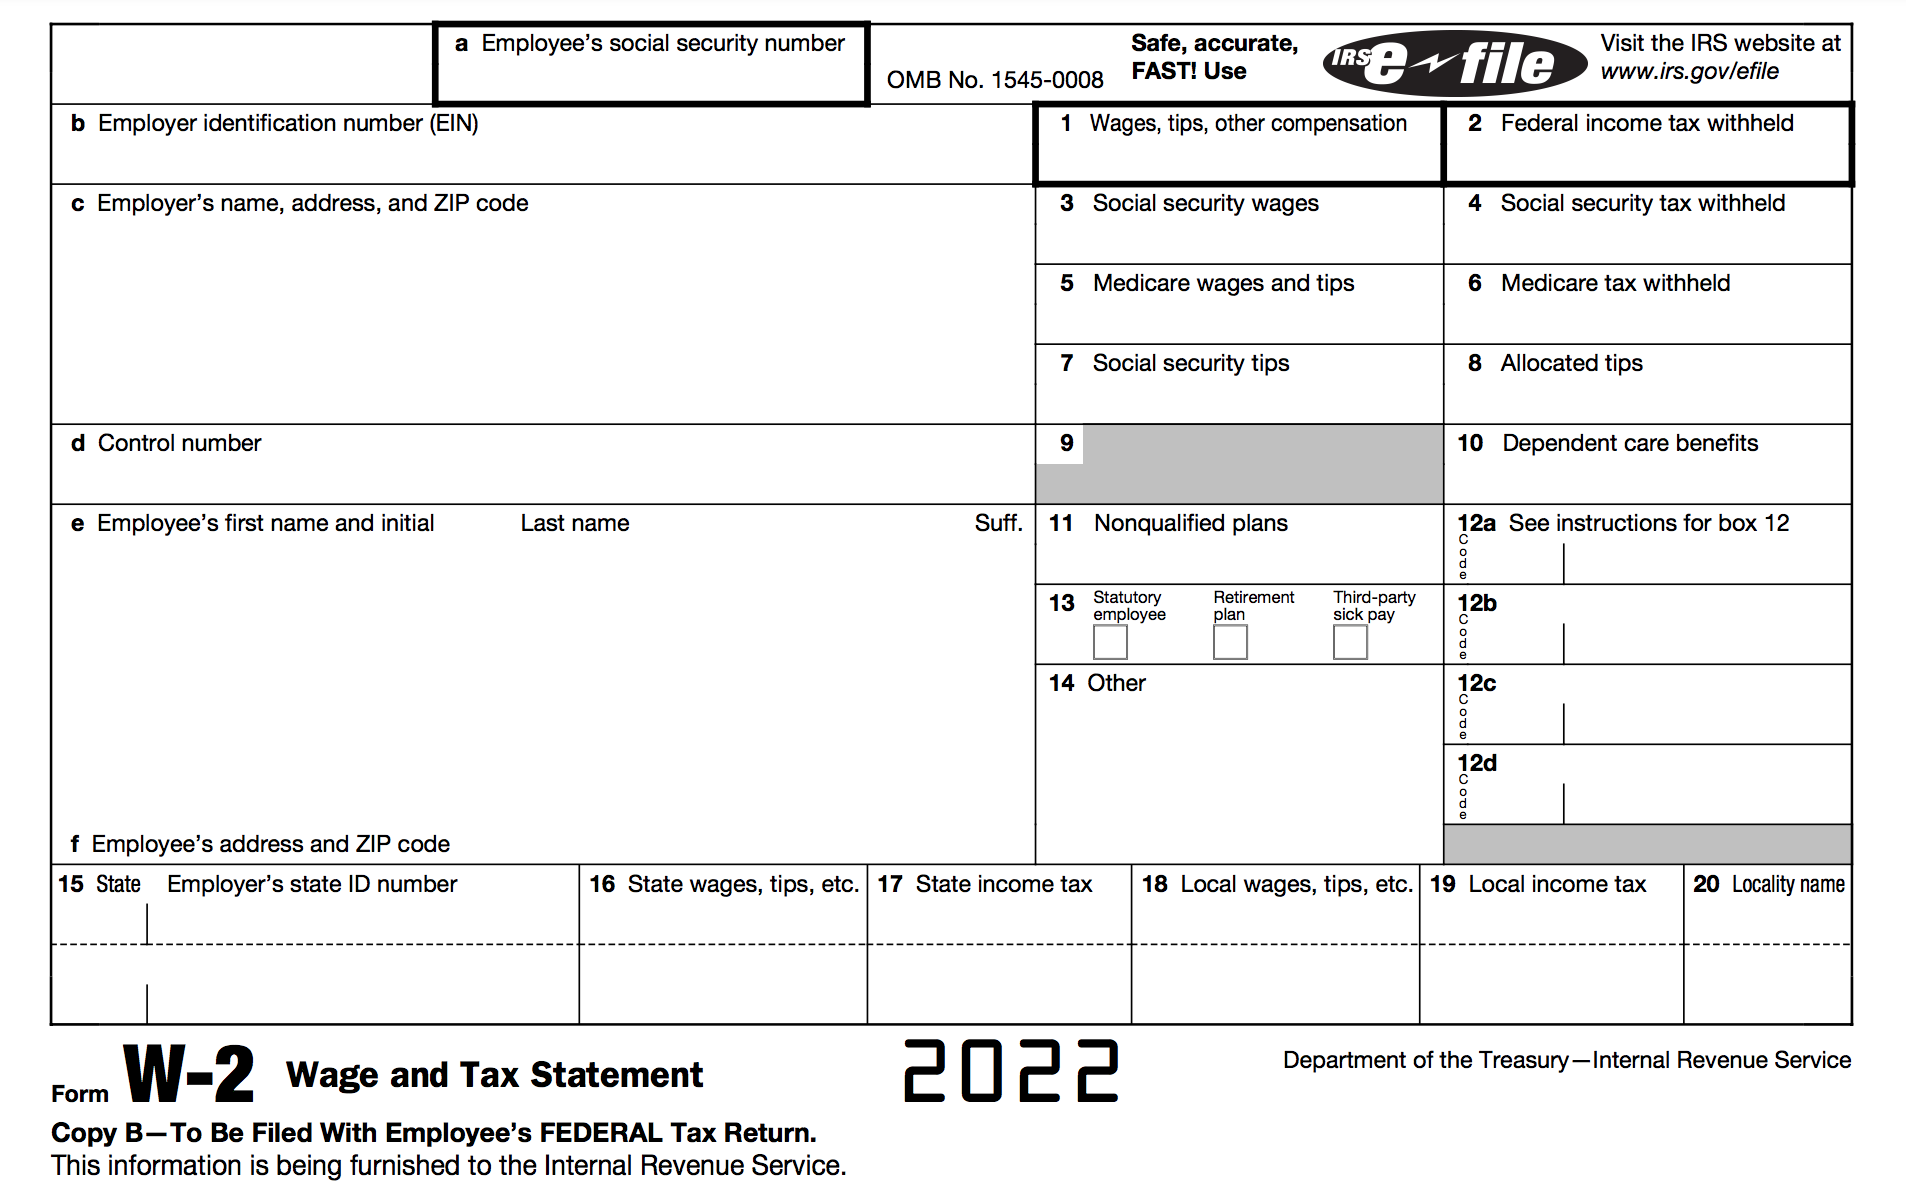 How To Fill Out A W-2 Tax Form | Smartasset with Whole Foods Former Employee W2